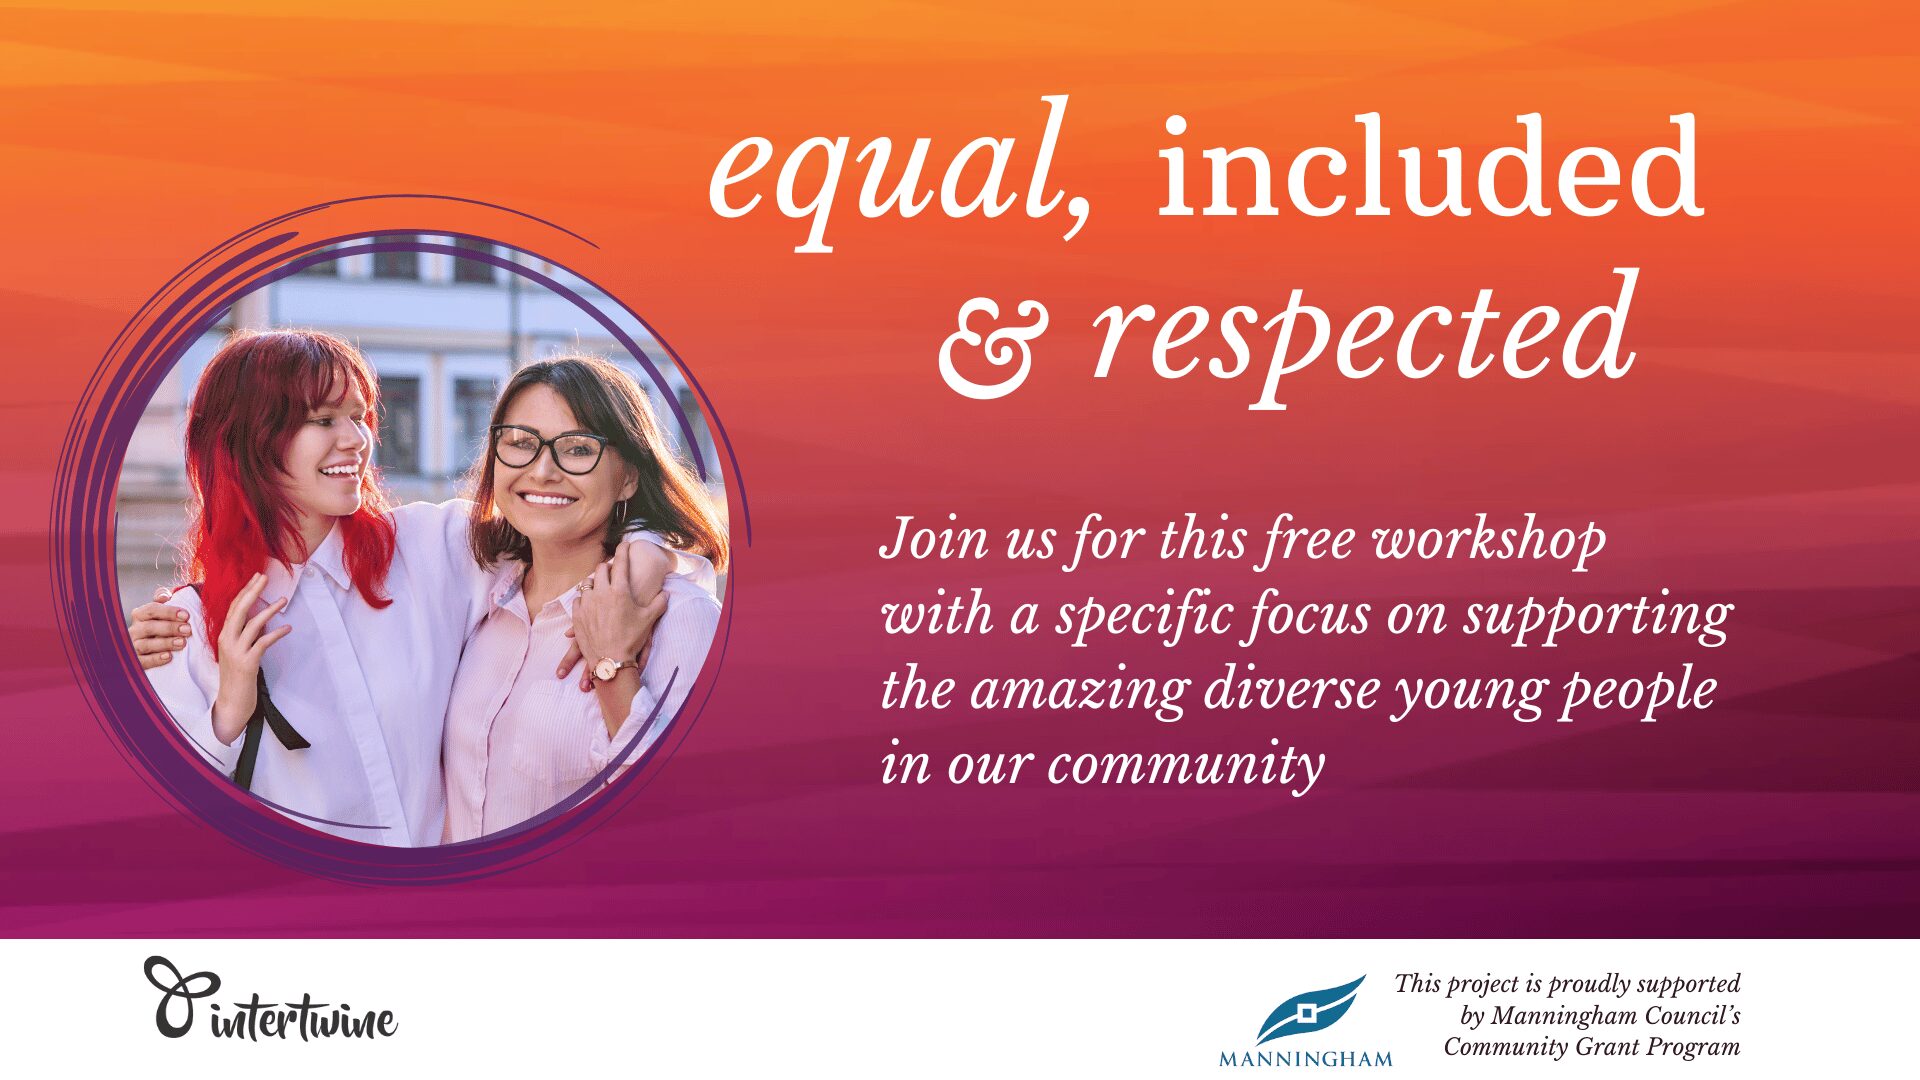 equal, included and respected. Join us for this free workshop 
with a specific focus on supporting the amazing diverse young people 
in our community. In a circle, an image of an older woman smiling at the camera with her arm around a teenager with bright red hair.